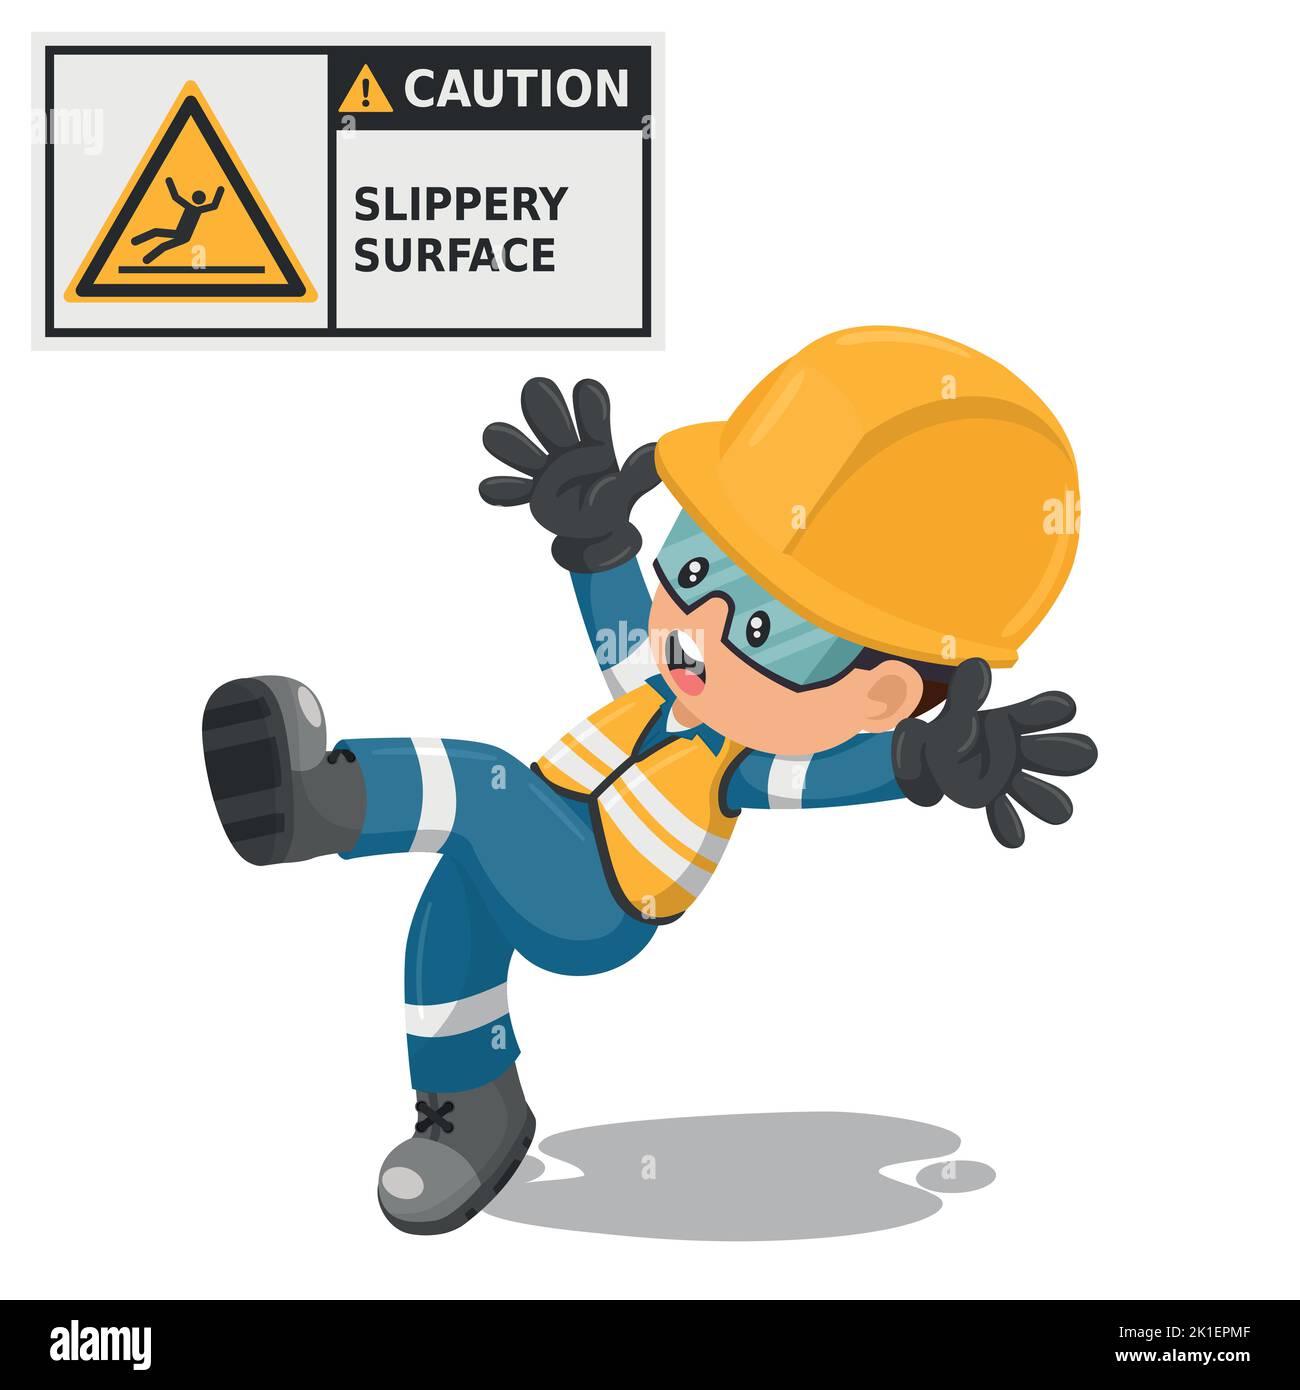 Industrial worker with slippery surface hazard sign warning. Caution icon and pictogram. Work accident. Worker with personal protective equipment. Ind Stock Vector